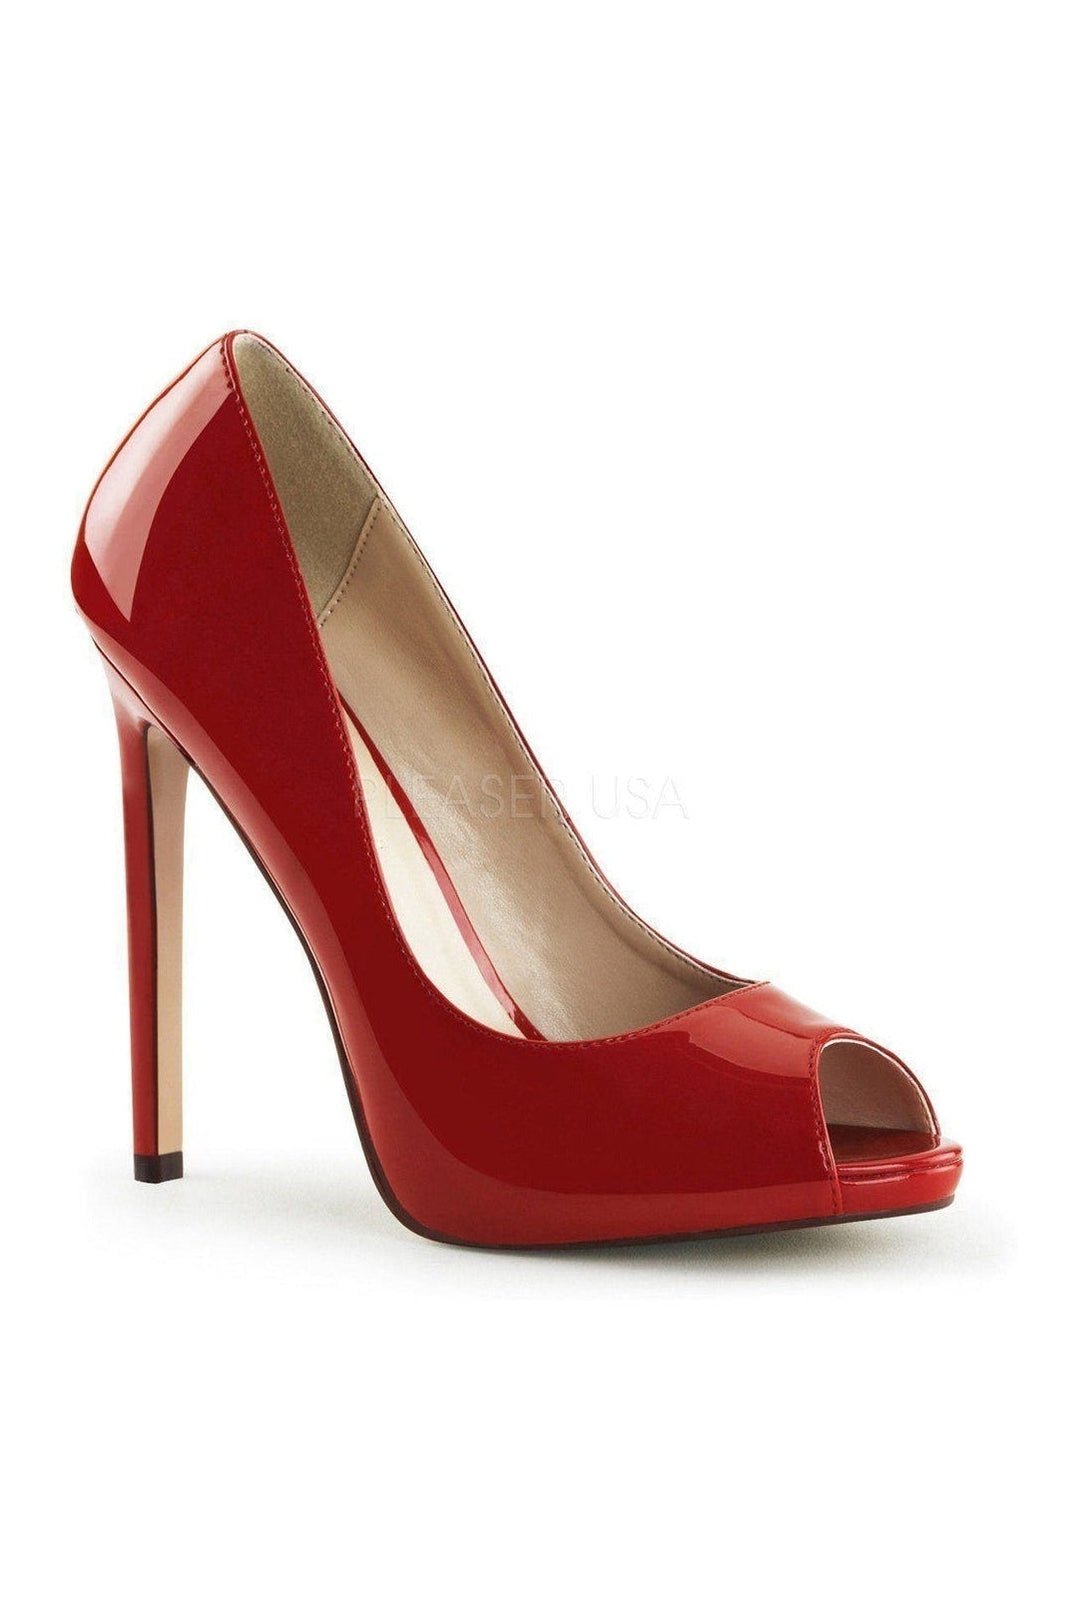 SEXY-42 Pump | Red Patent-Pleaser-Red-Pumps-SEXYSHOES.COM